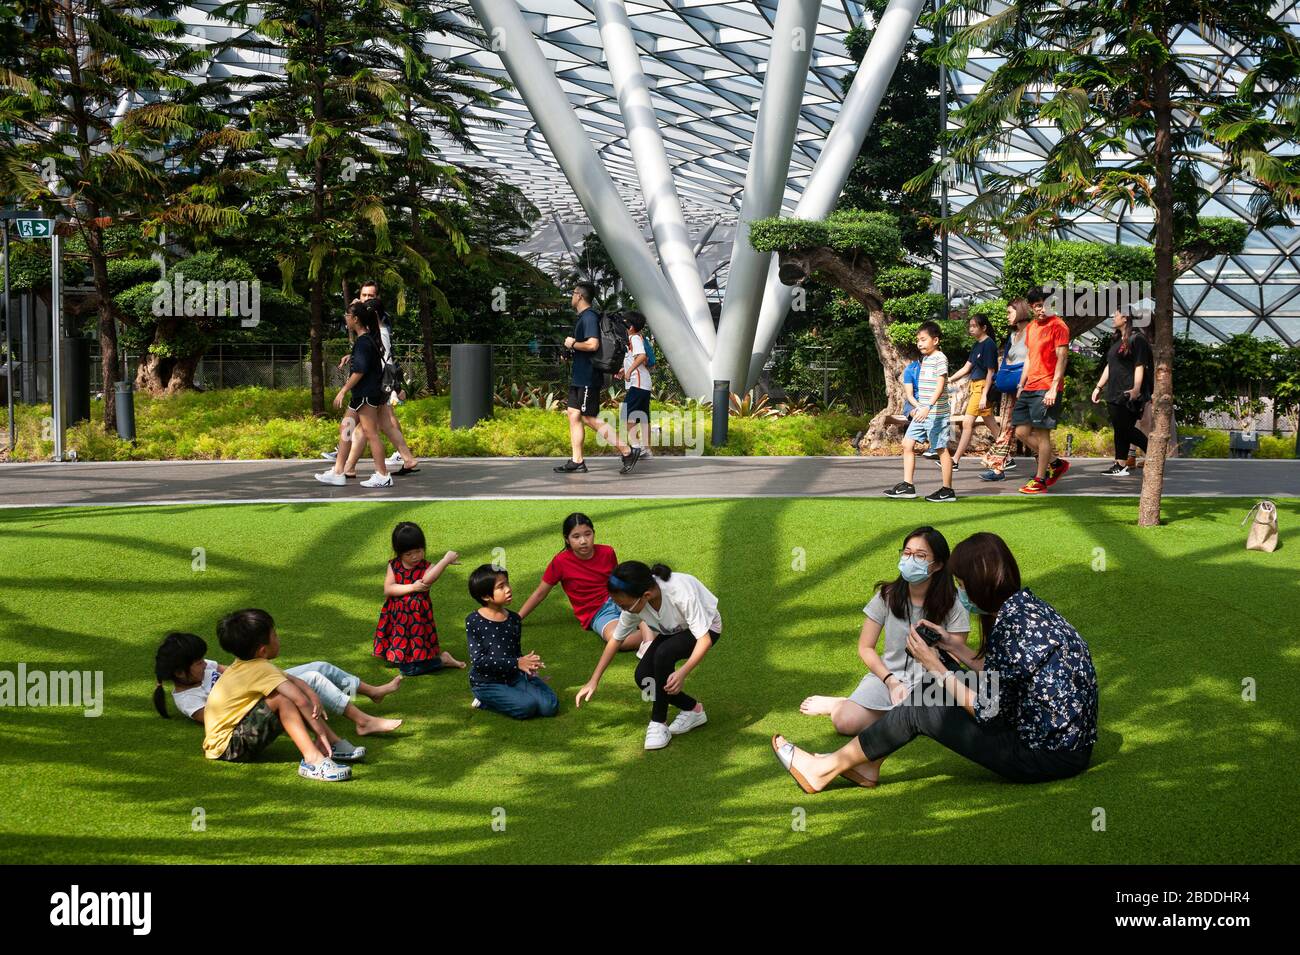 18.03.2020, Singapore, , Singapore - Children playing on the artificial turf of the Foggy Bowls, a playground surrounded by pine trees in Canopy Park, Stock Photo